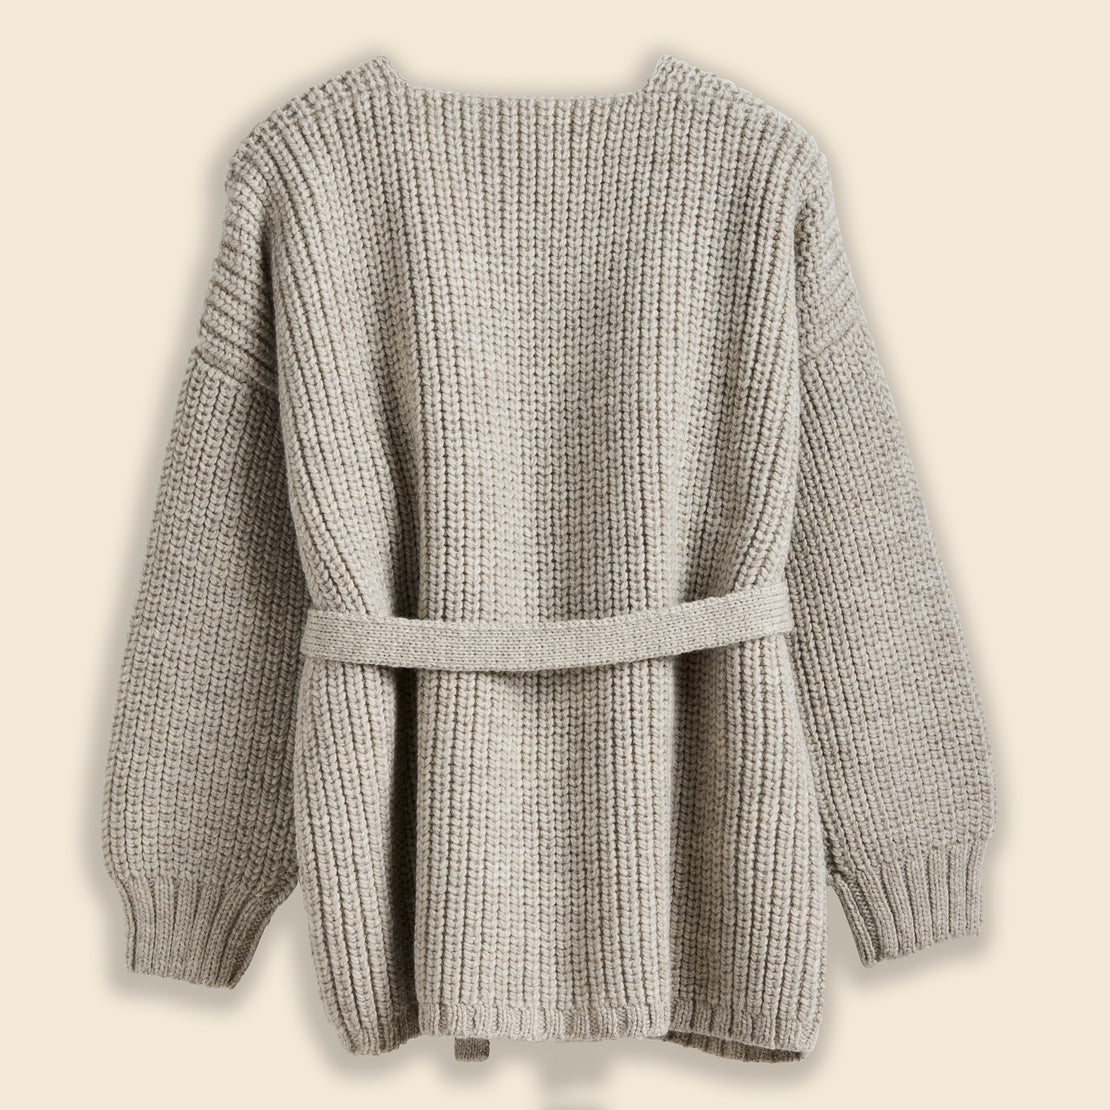 Sweater Coat - Undued Fog - First Rite - STAG Provisions - W - Tops - Sweater